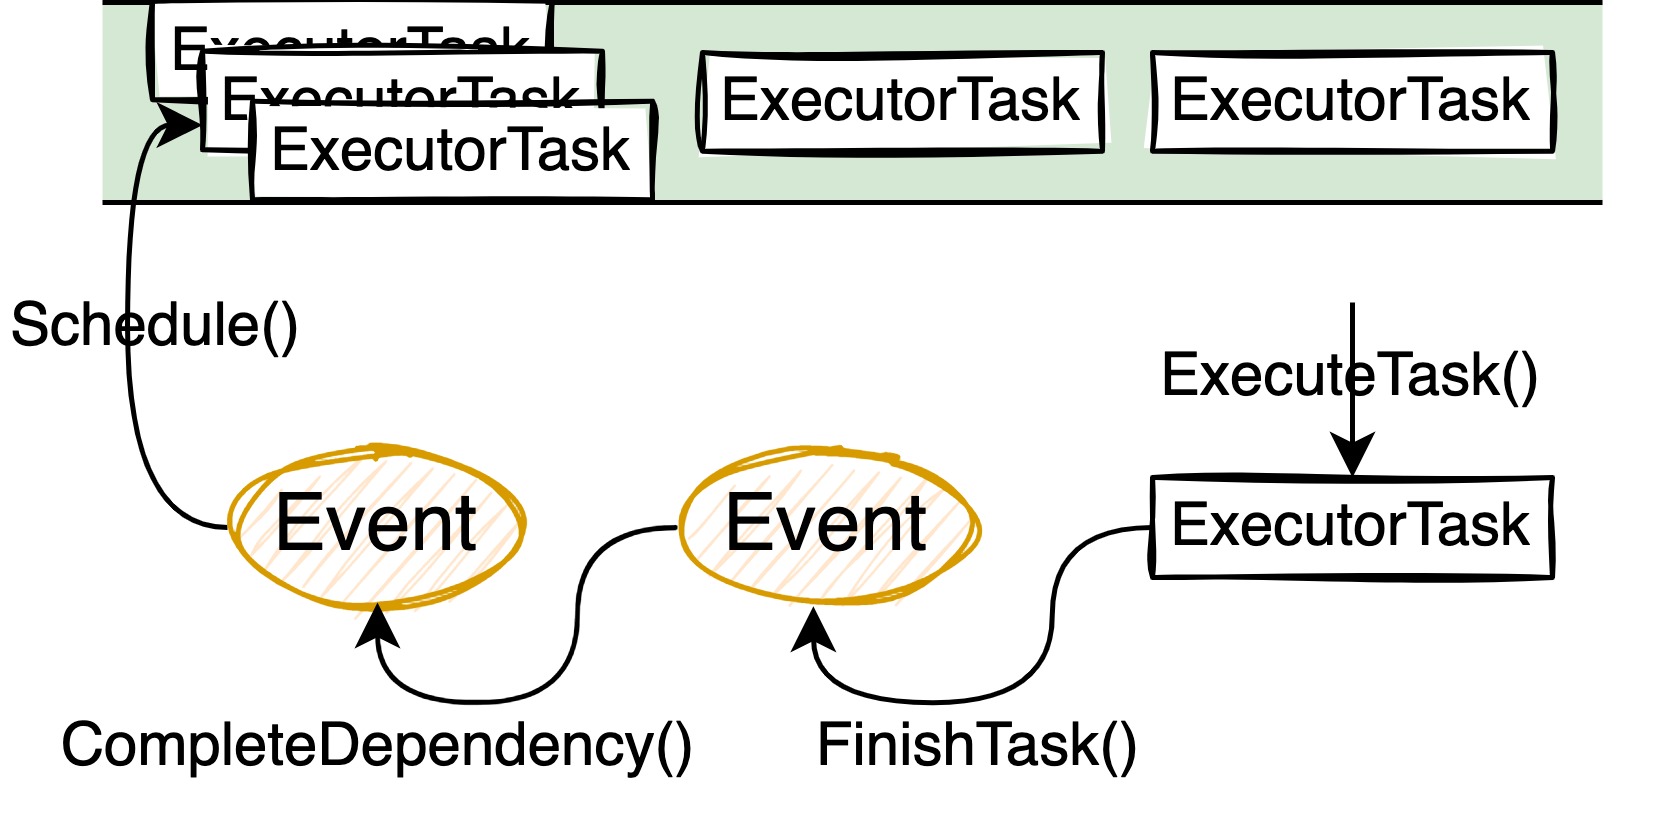 Event based scheduling model